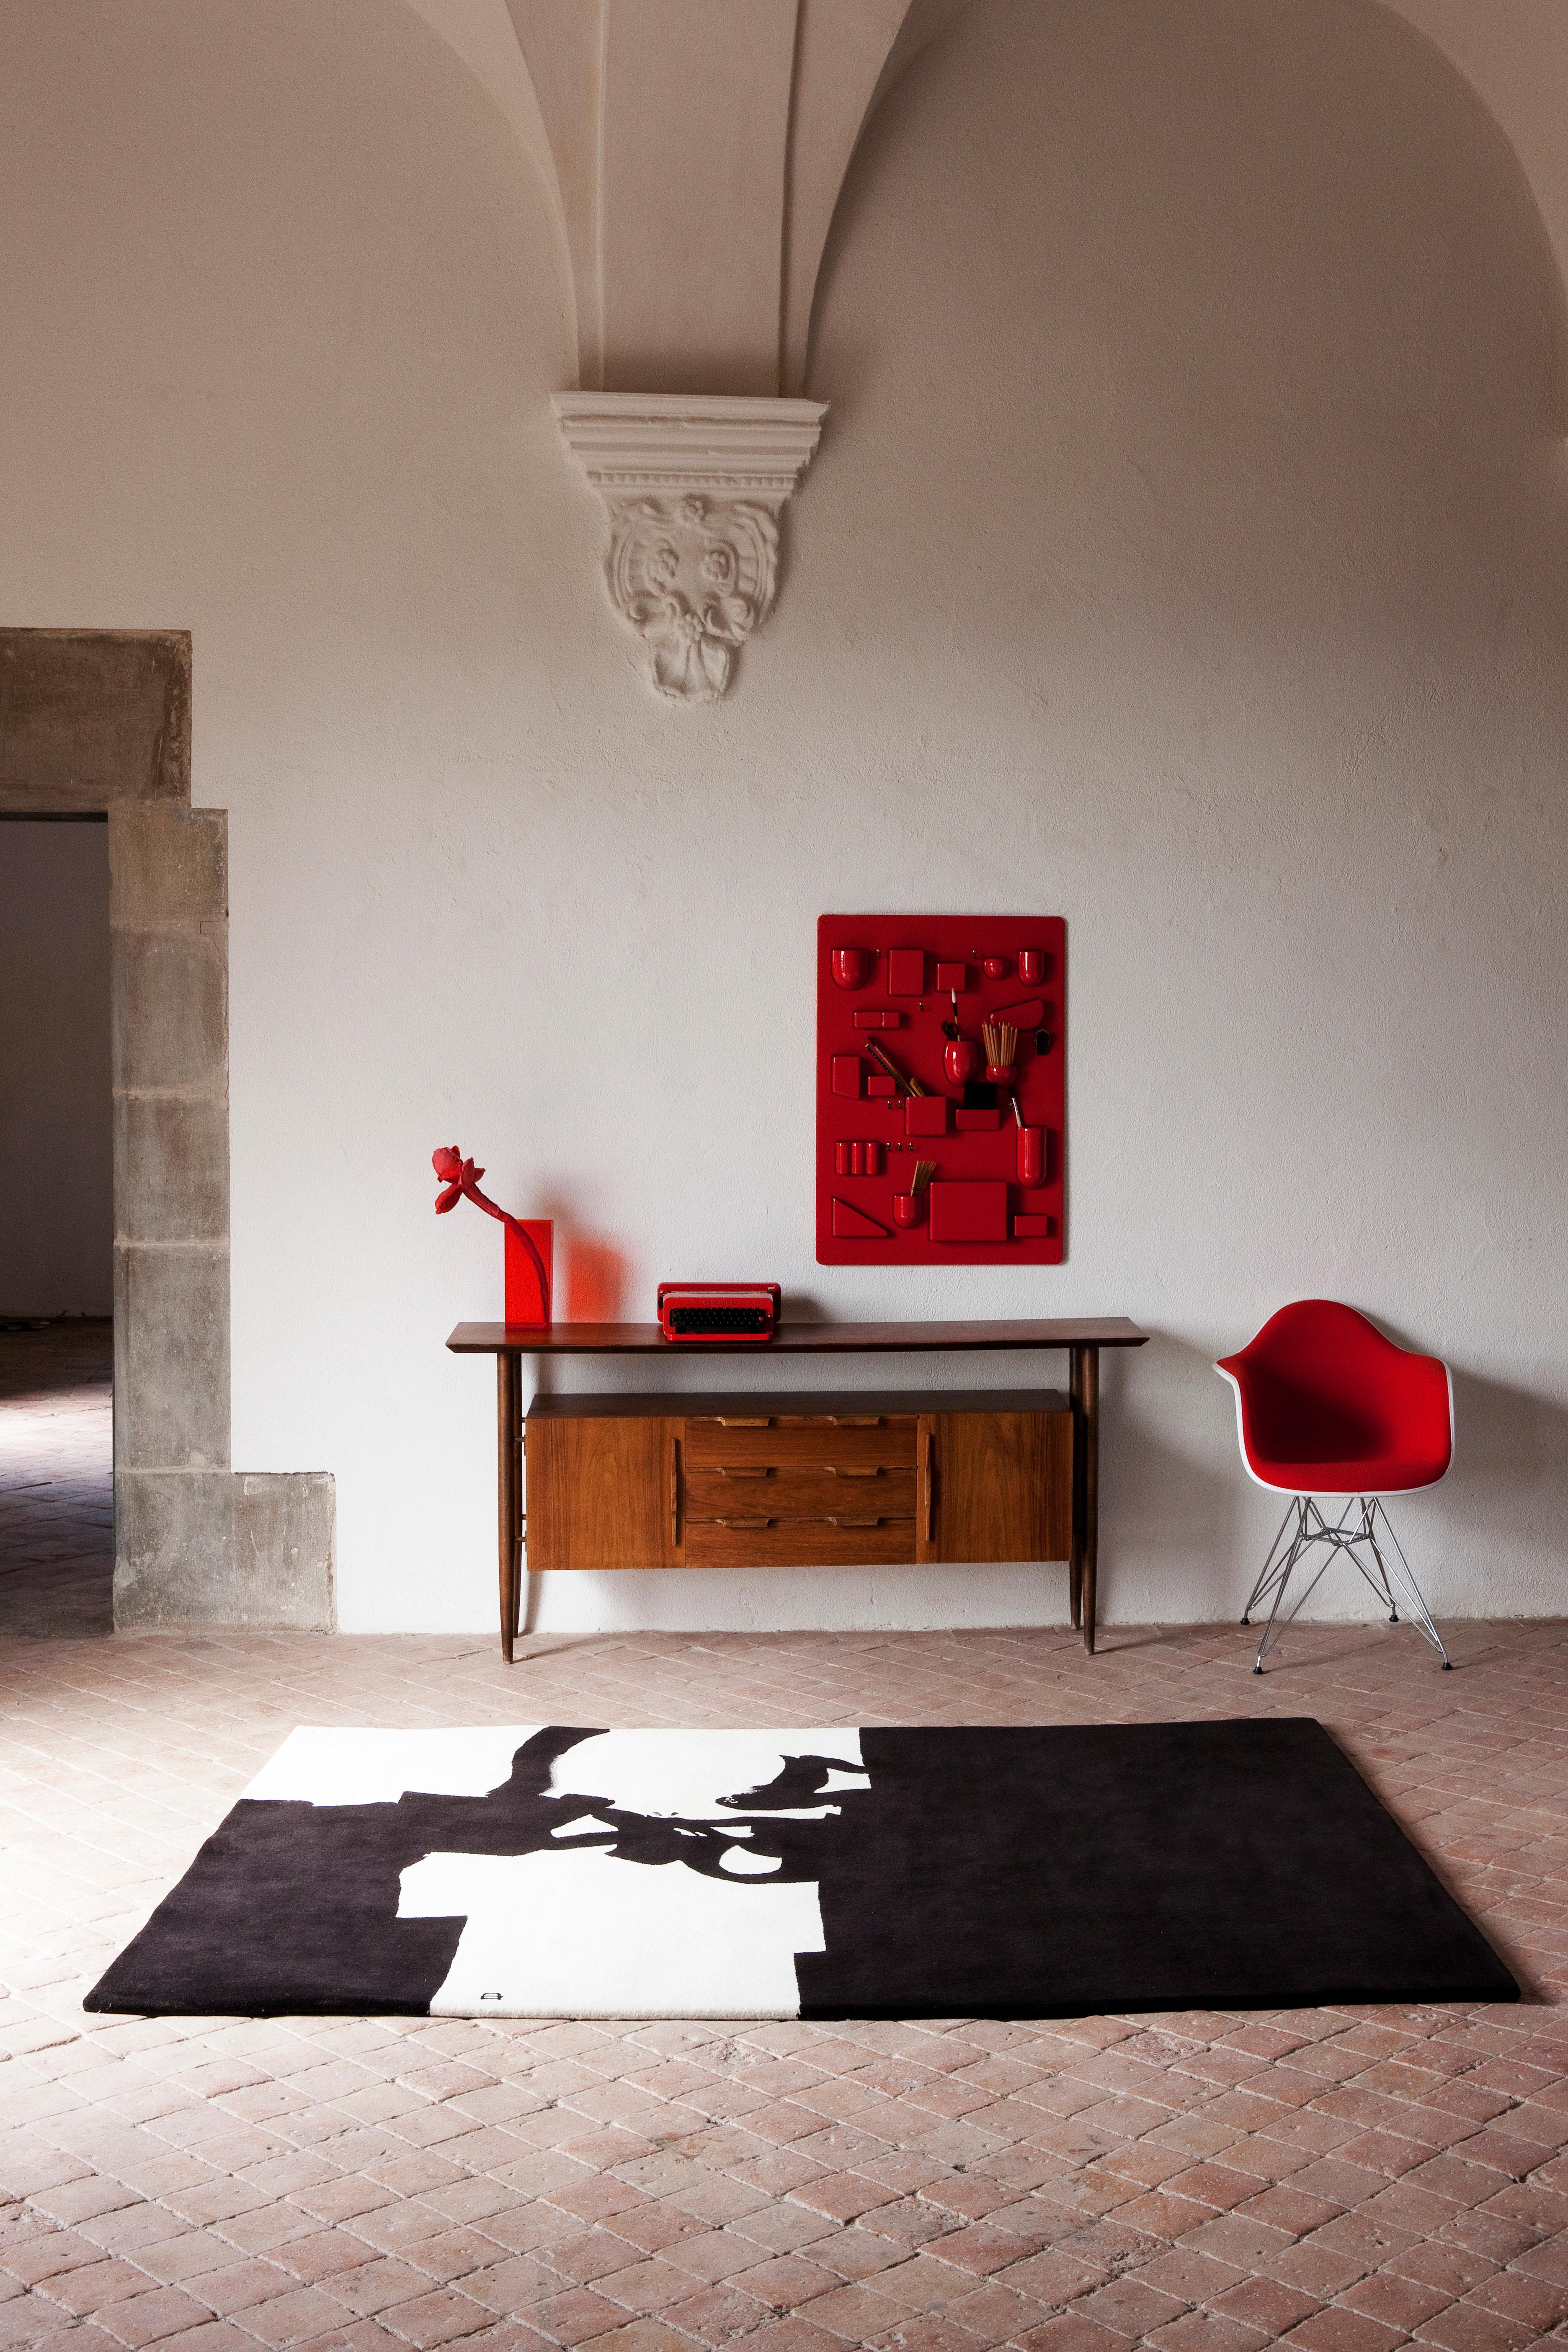 Hand-Knotted 'Mano 1993' Rug by Eduardo Chillida for Nanimarquina For Sale